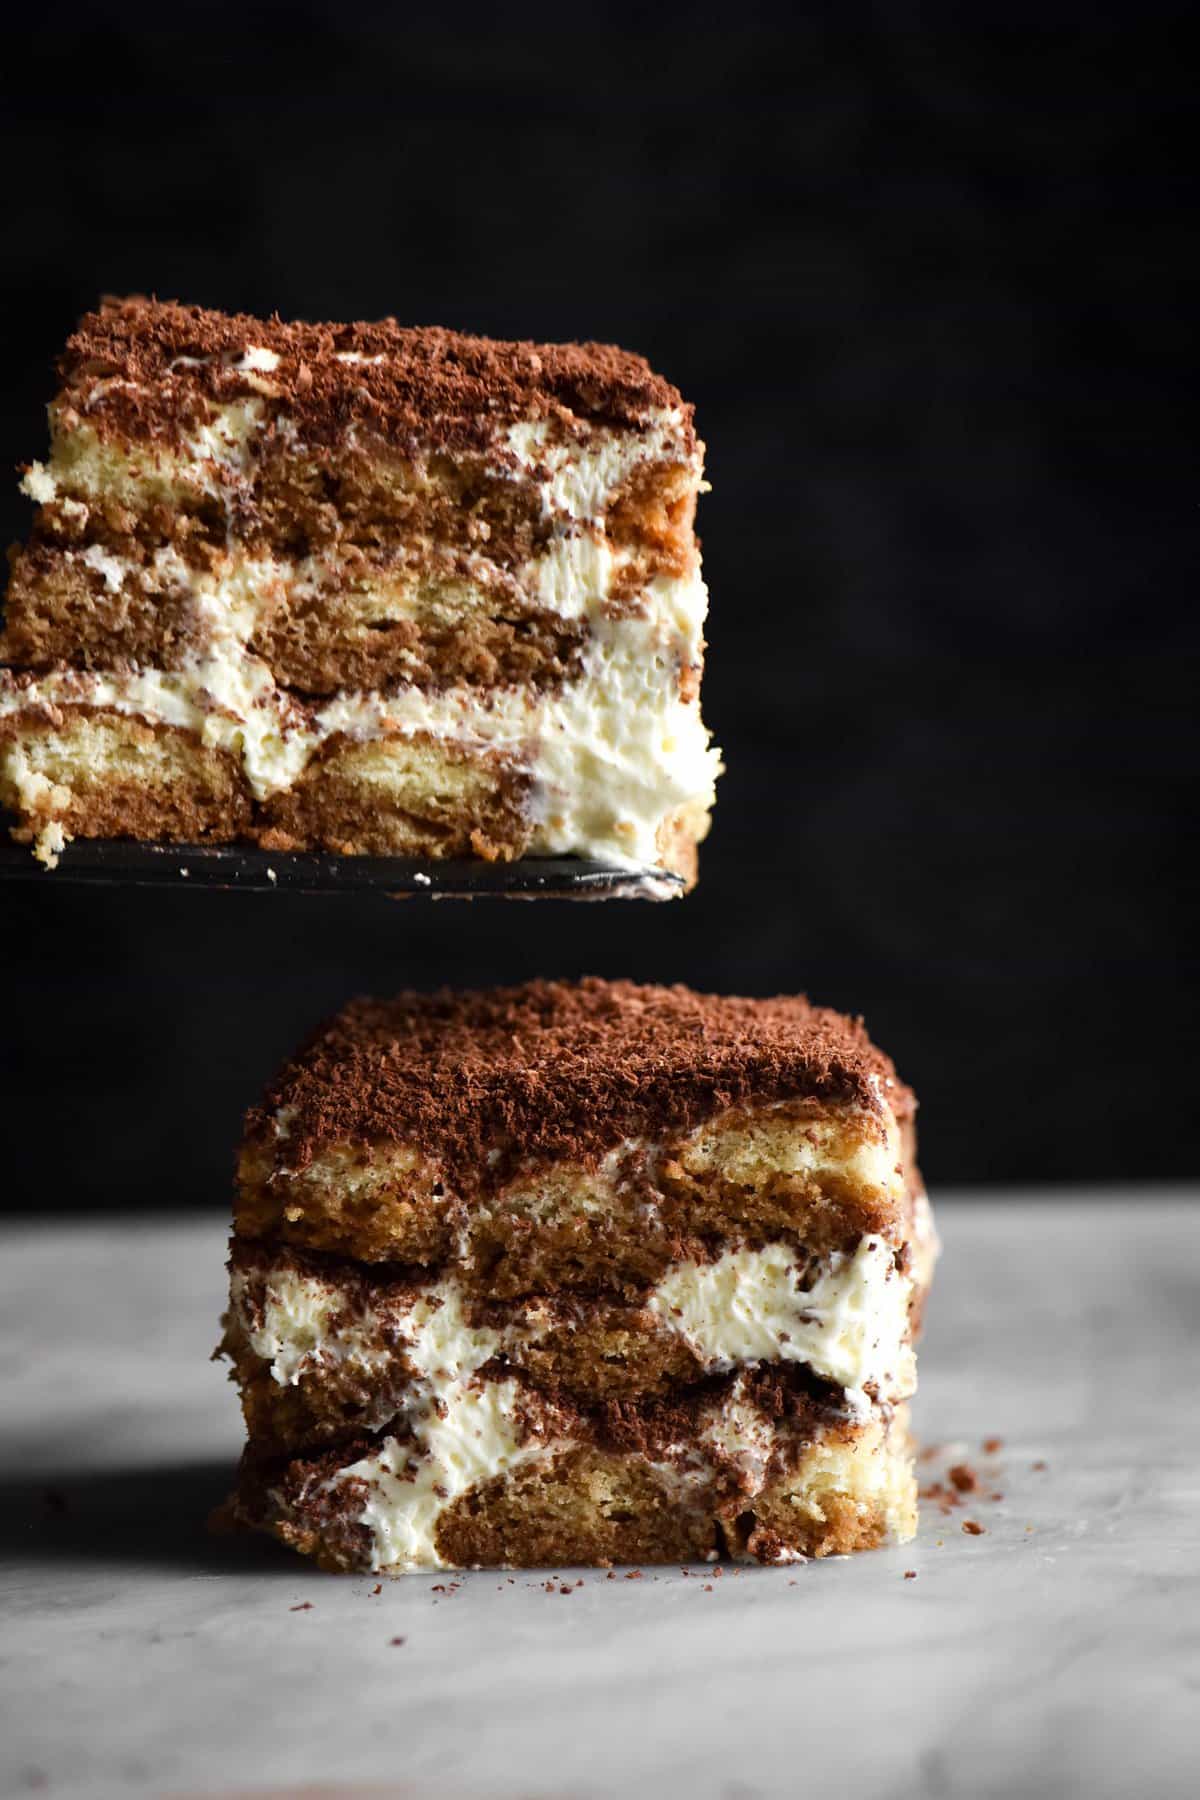 A slice on view of two slices of gluten free, FODMAP friendly tiramisu. One piece of tiramisu is suspended in the air, while the other sits atop a white marble table against a black backdrop